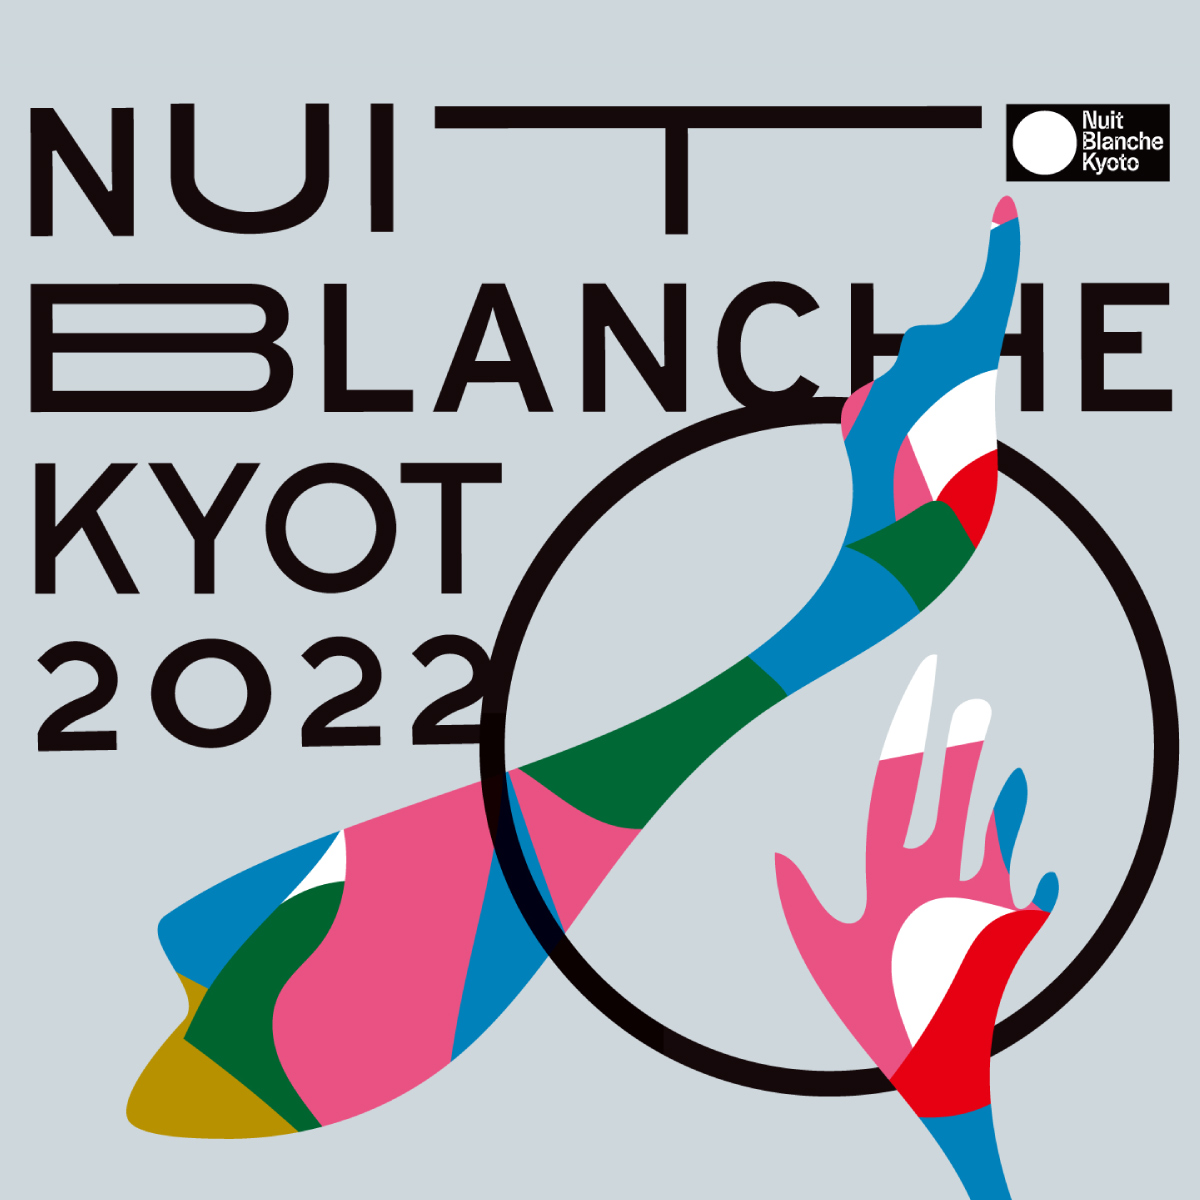 NUIT BLANCHE KYOTO